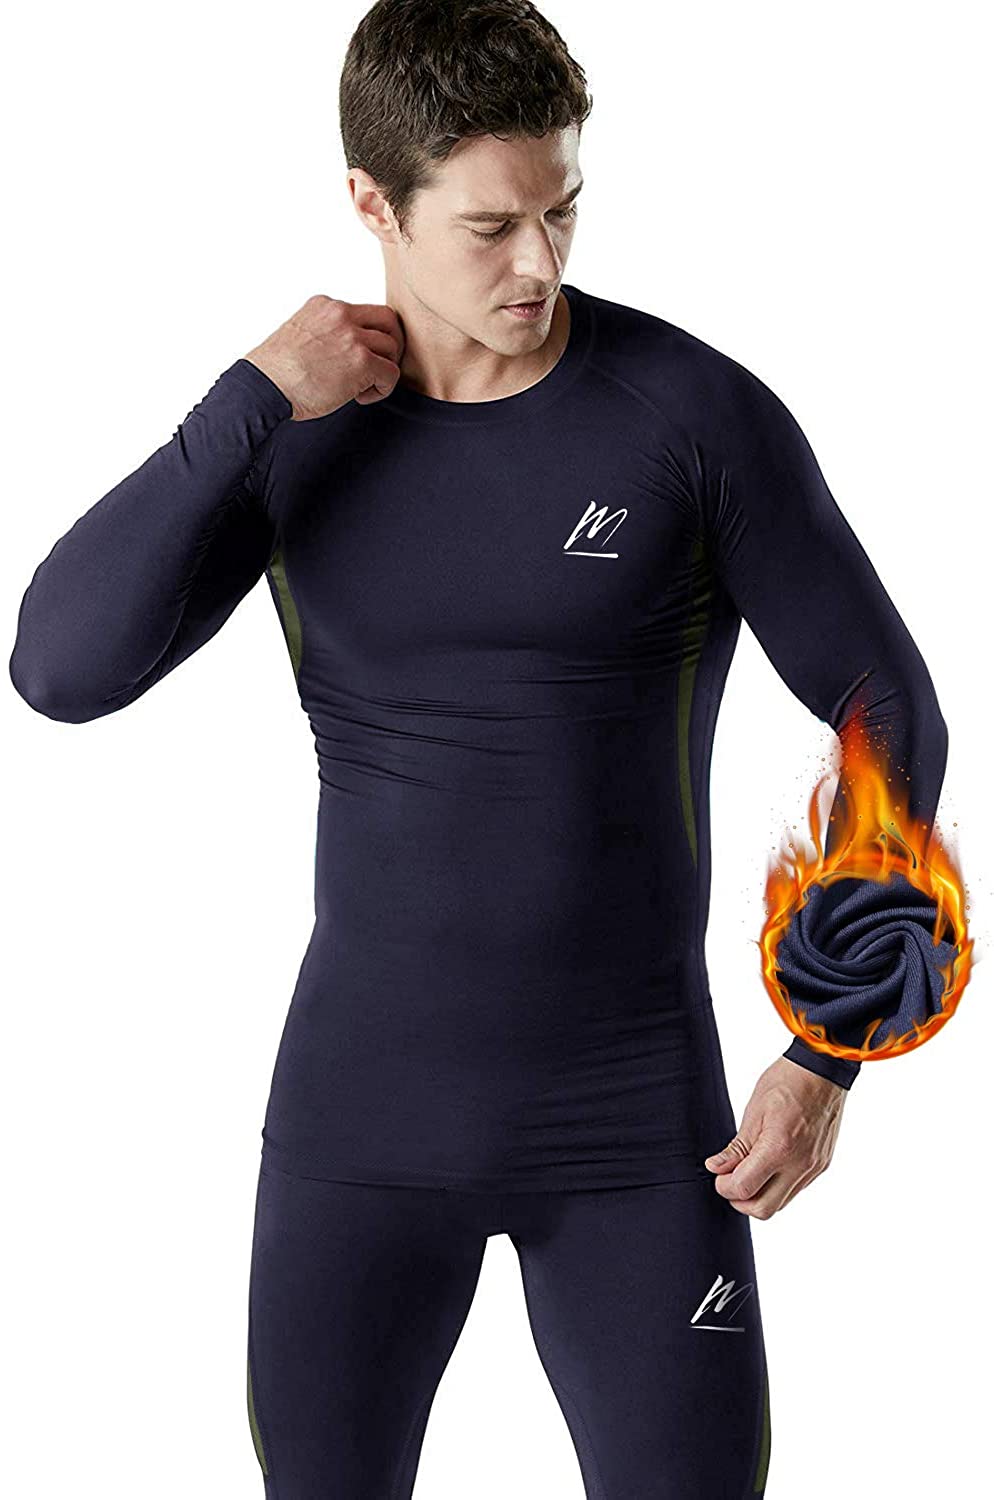 Fleece Lined Base Layer Set Long Johns for Running Skiing MeetHoo Thermal Underwear for Men 